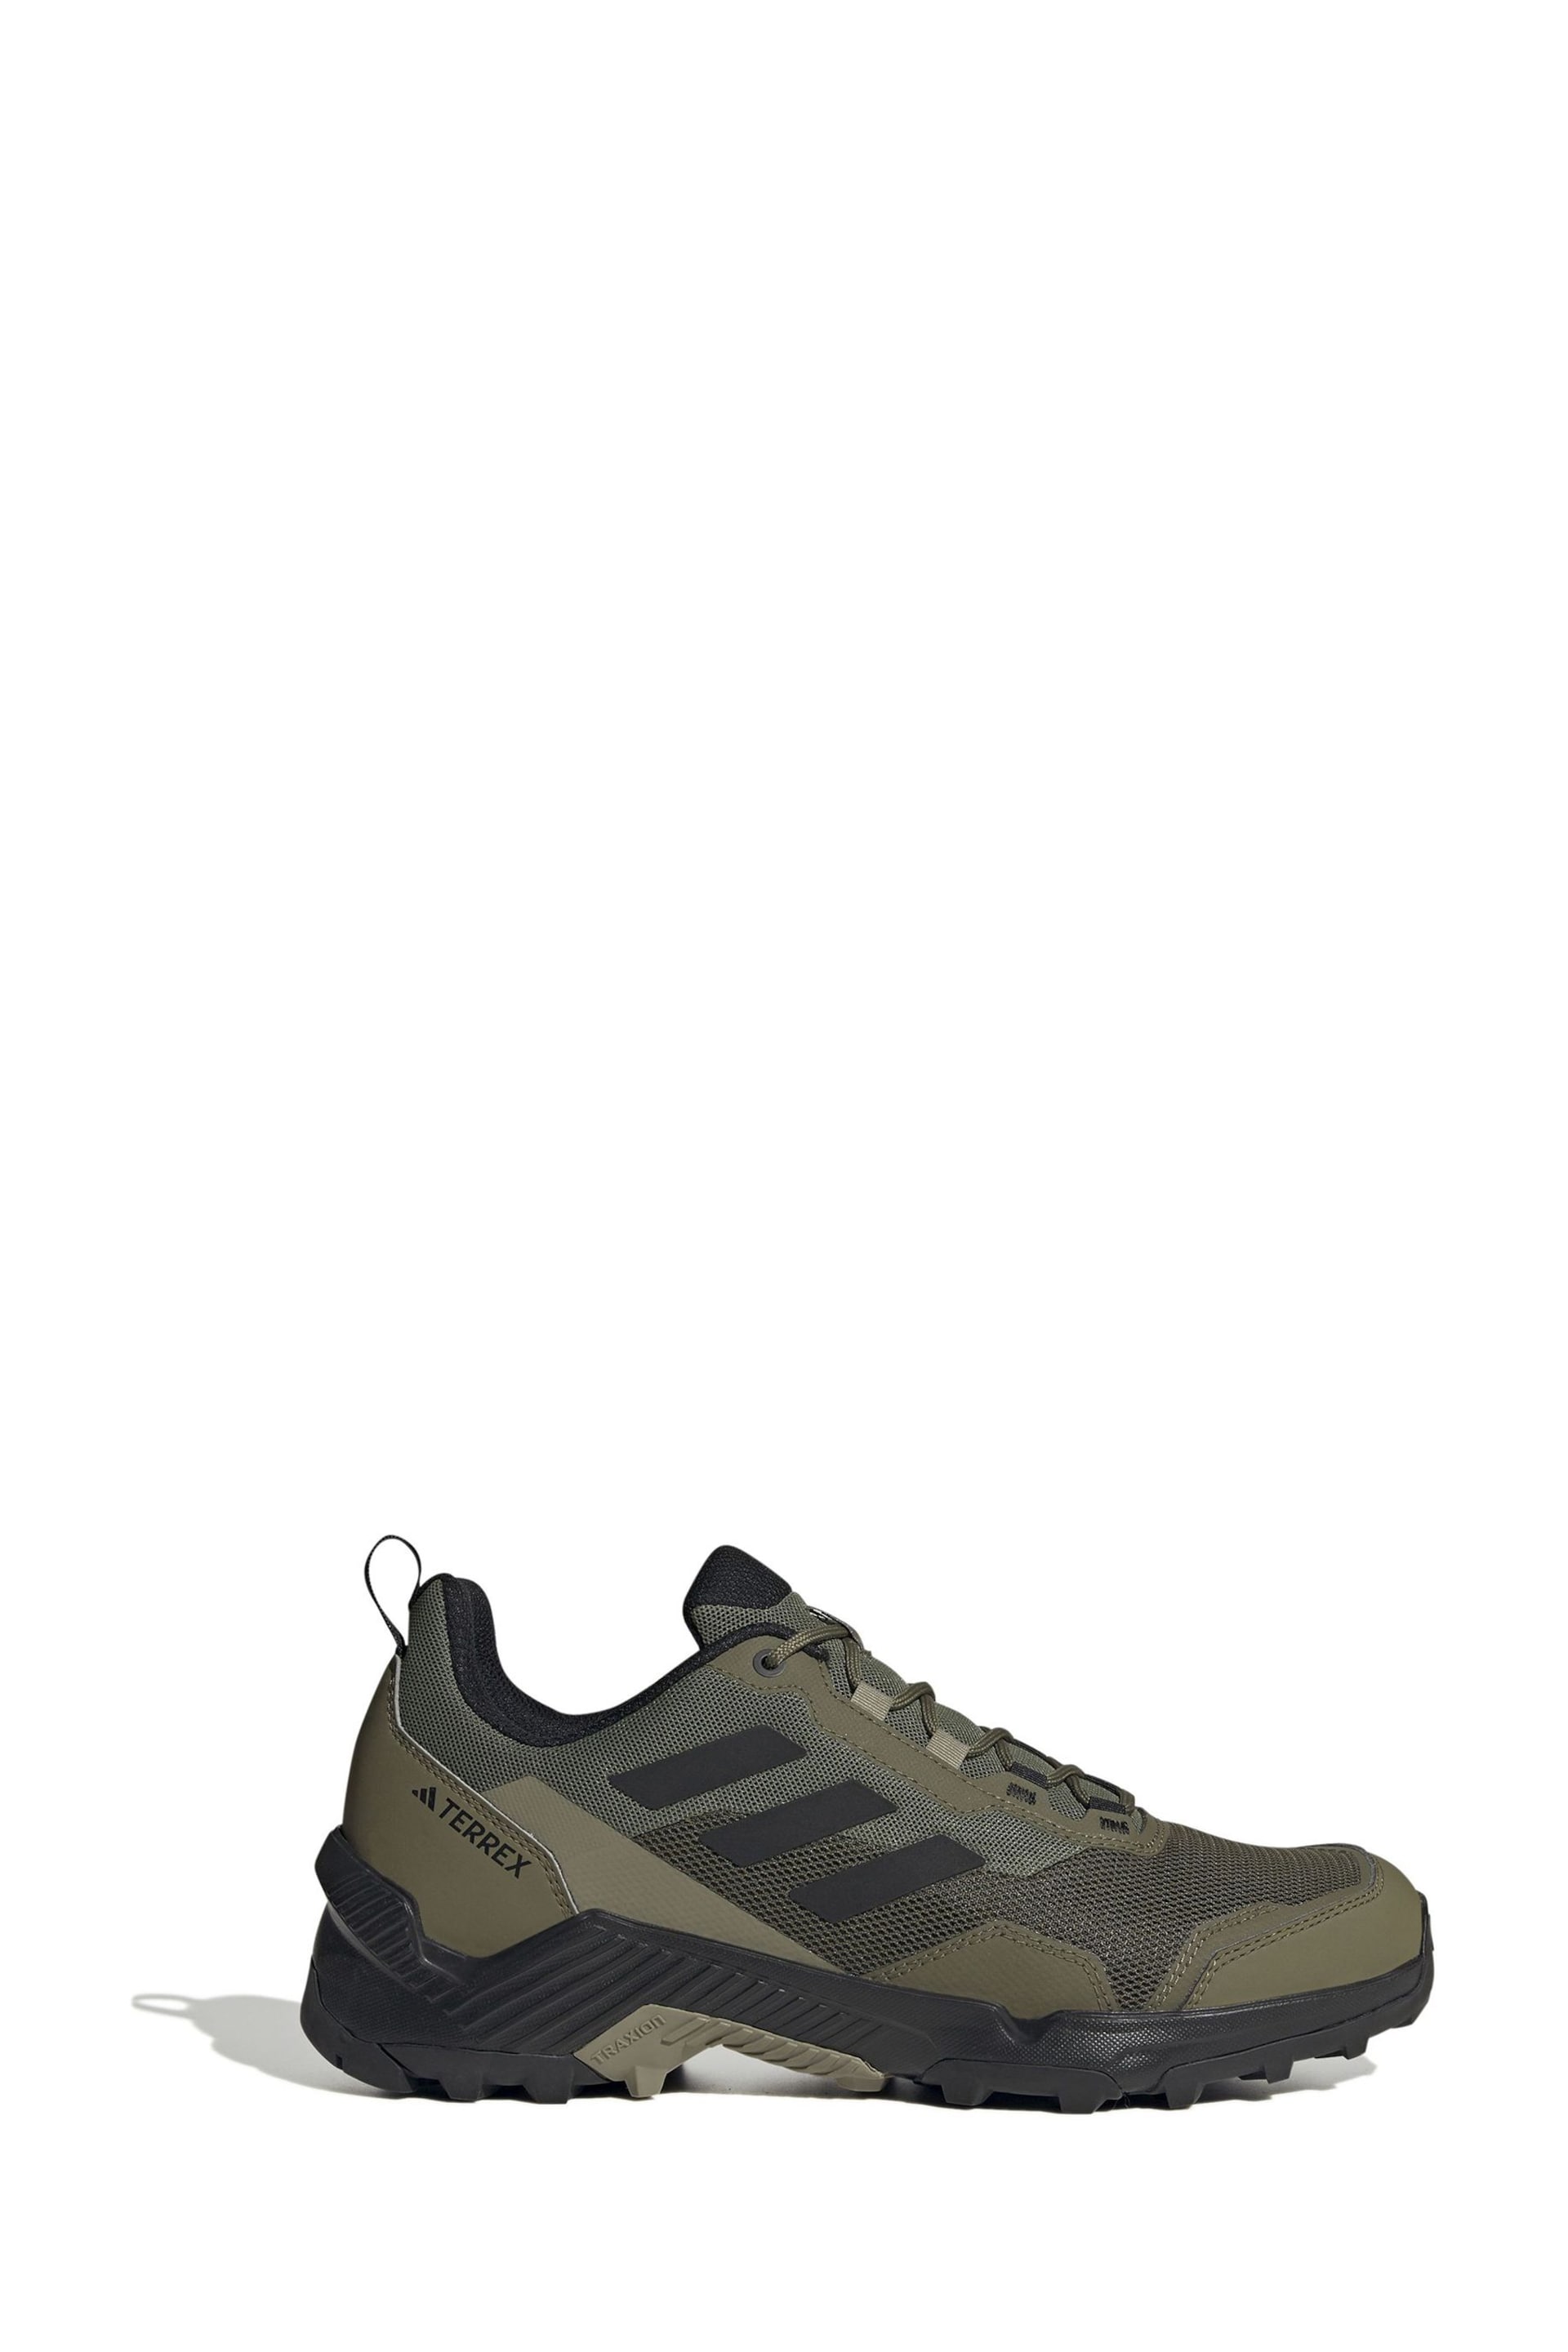 adidas Terrex Eastrail 2 Trainers - Image 1 of 10